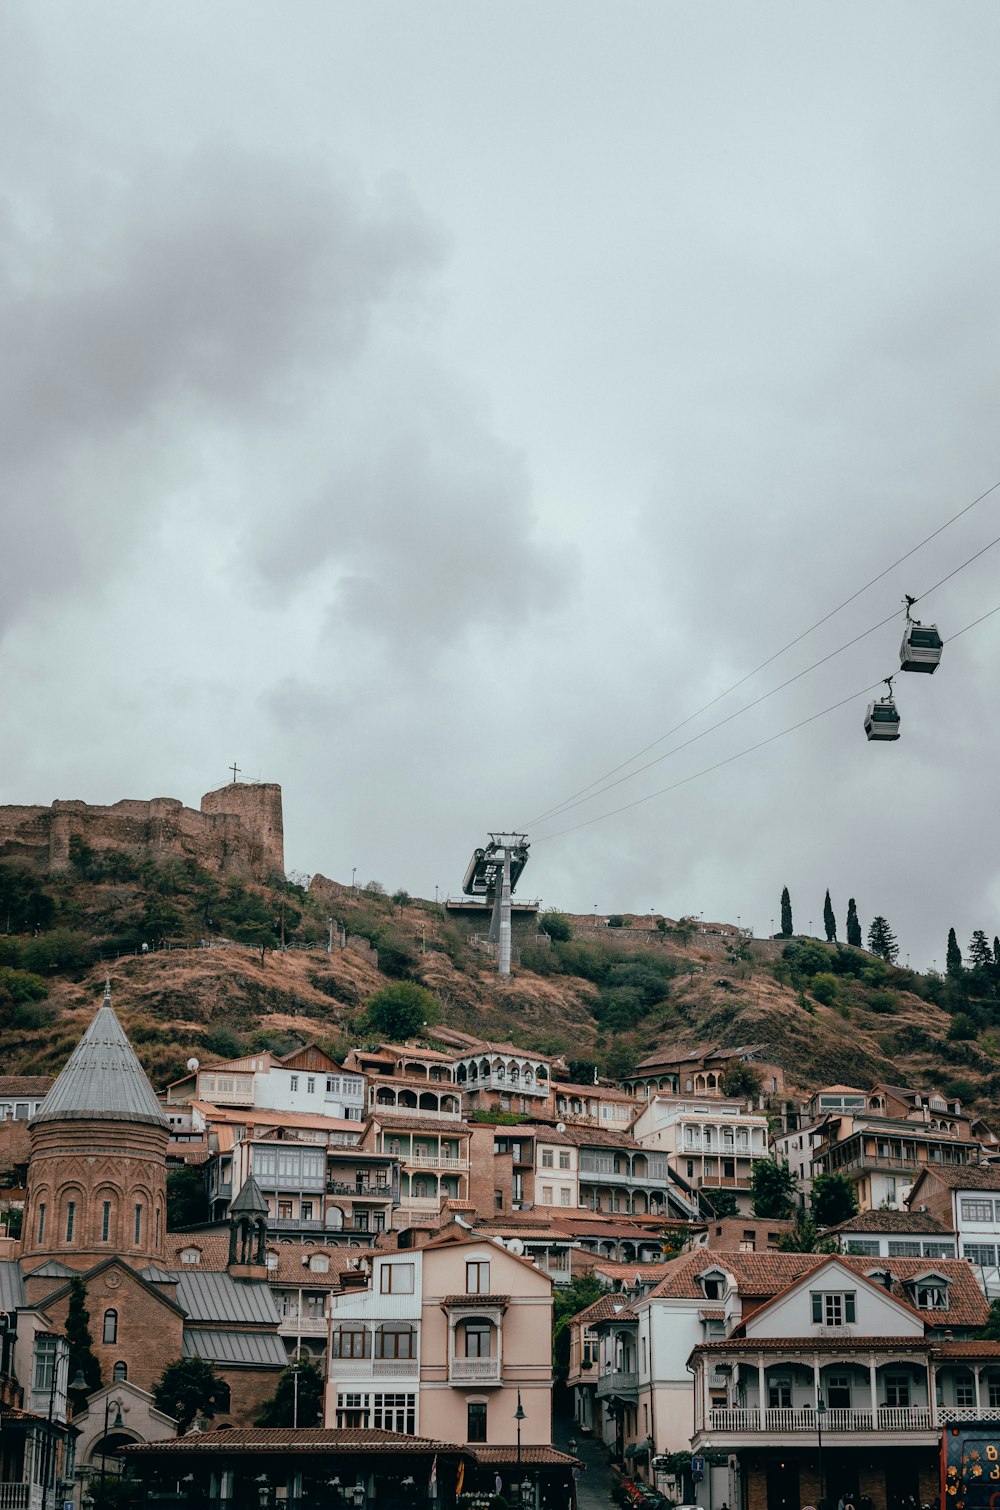 a cable car going over a city on a cloudy day